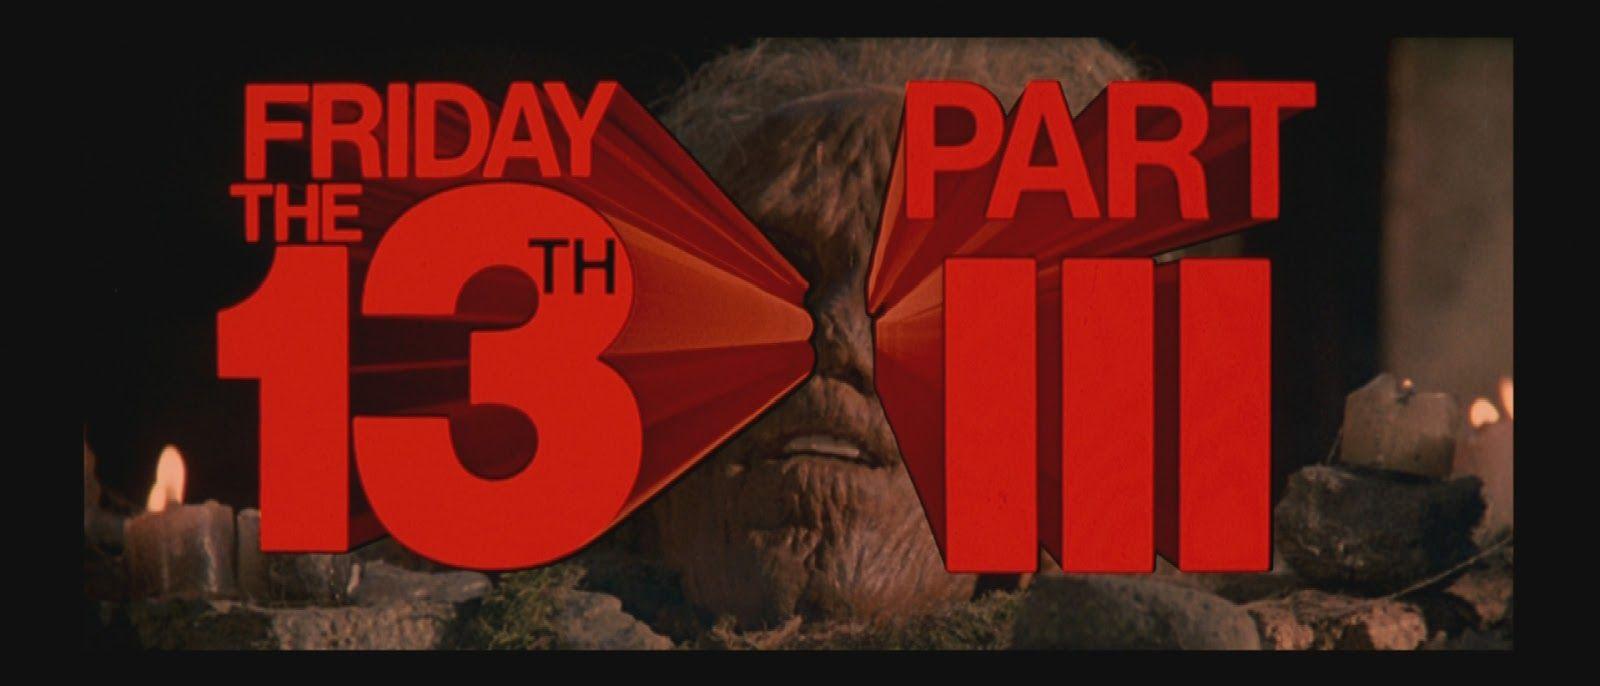 Friday the 13th Part 2 Logo - Making The Franchise: Friday The 13th Part 3 The 13th